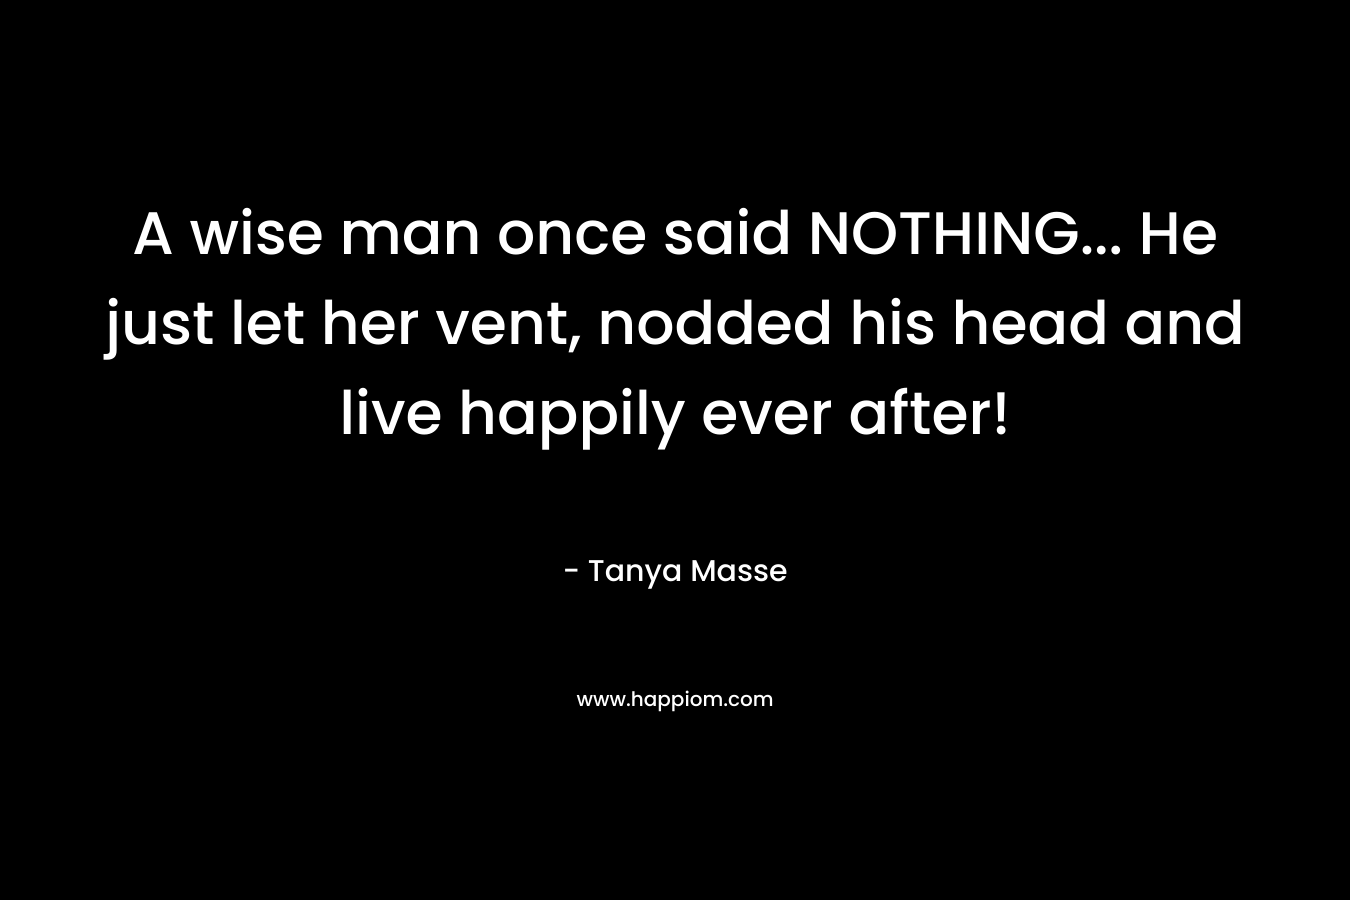 A wise man once said NOTHING... He just let her vent, nodded his head and live happily ever after!